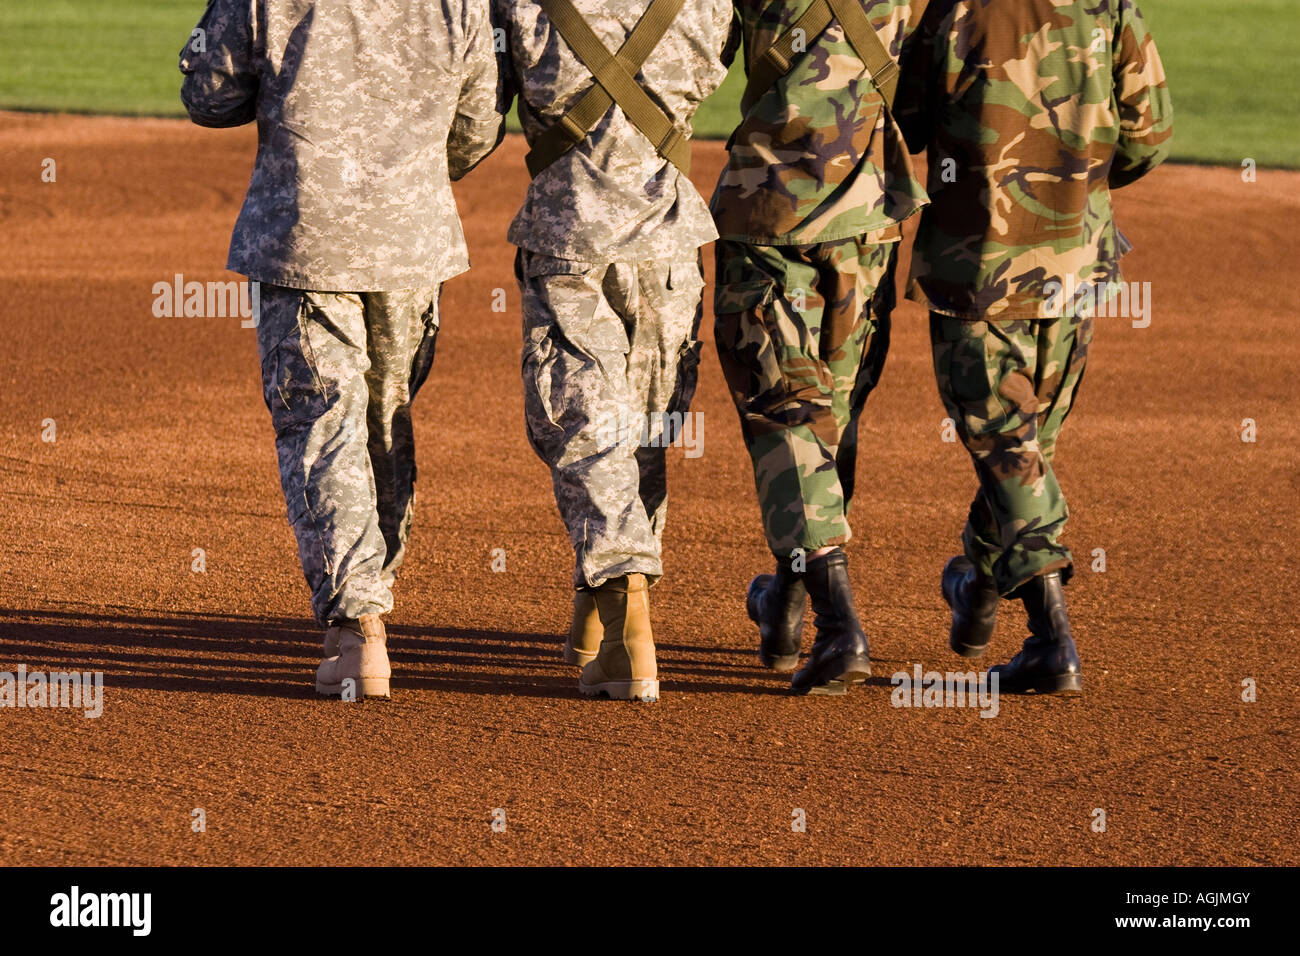 Four soldiers in military camouflage uniforms marching in unison. Stock Photo